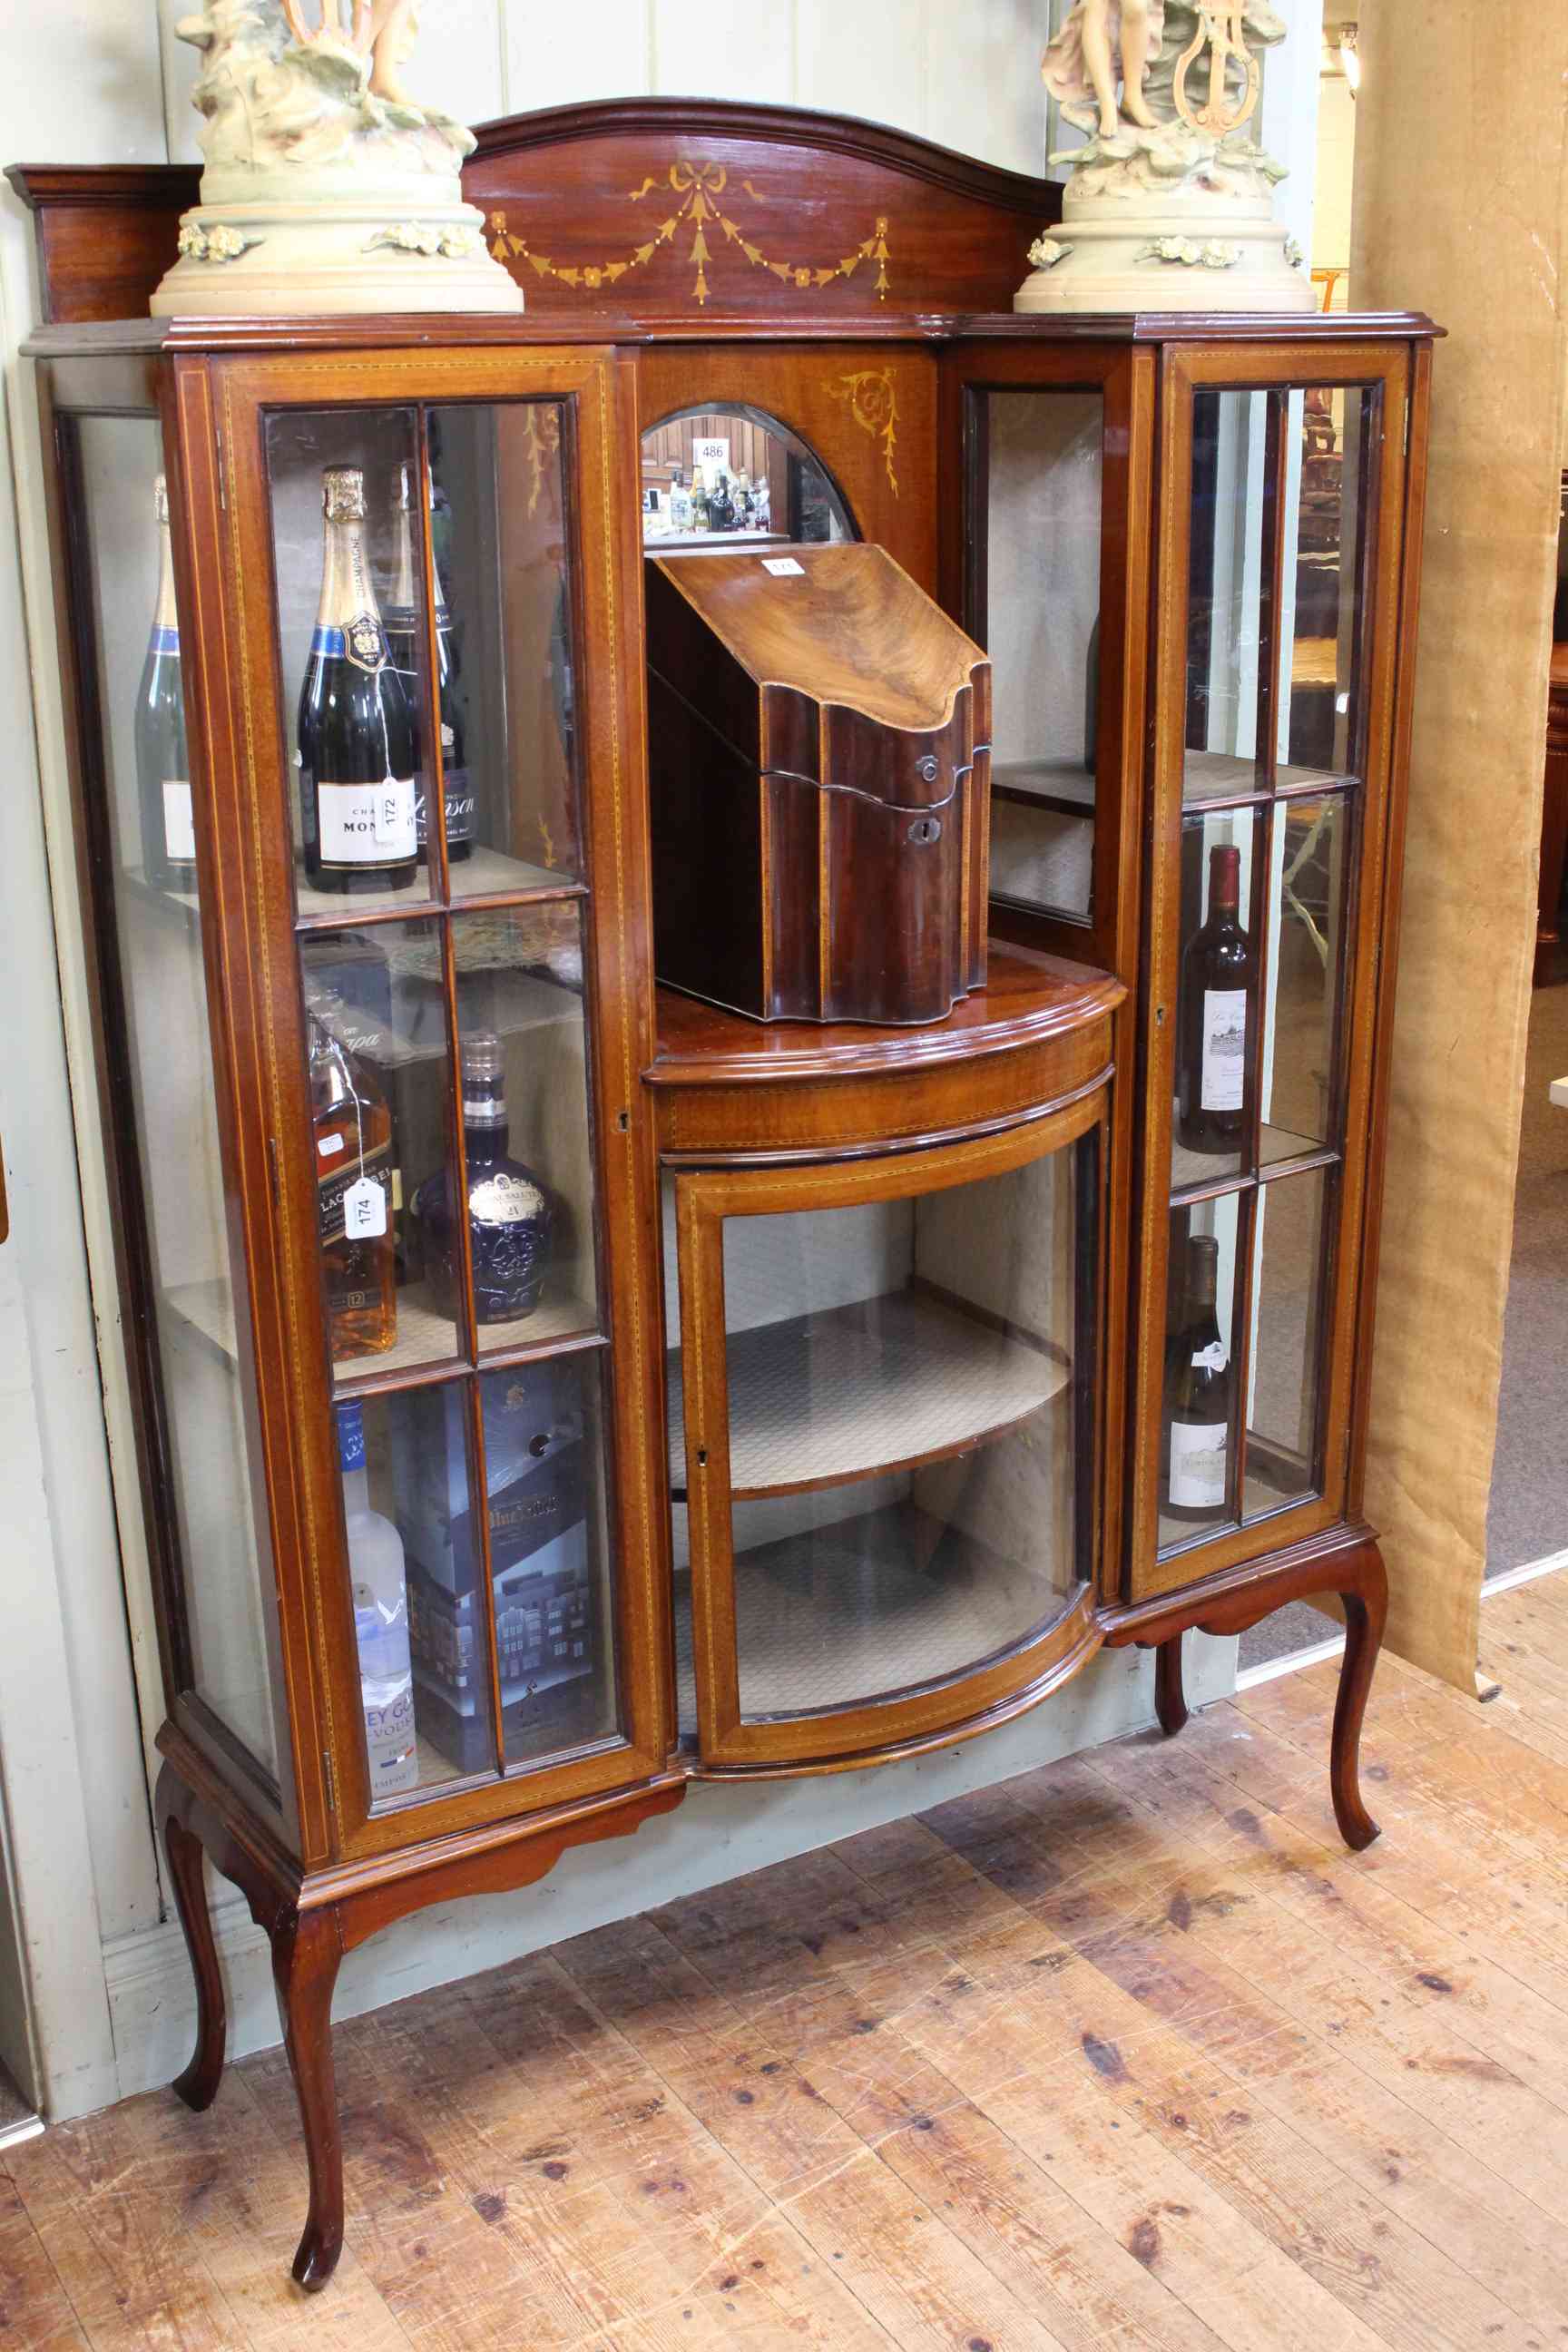 Edwardian mahogany floral and chequer inlaid mirror backed vitrine, 177cm by 121cm by 32cm.